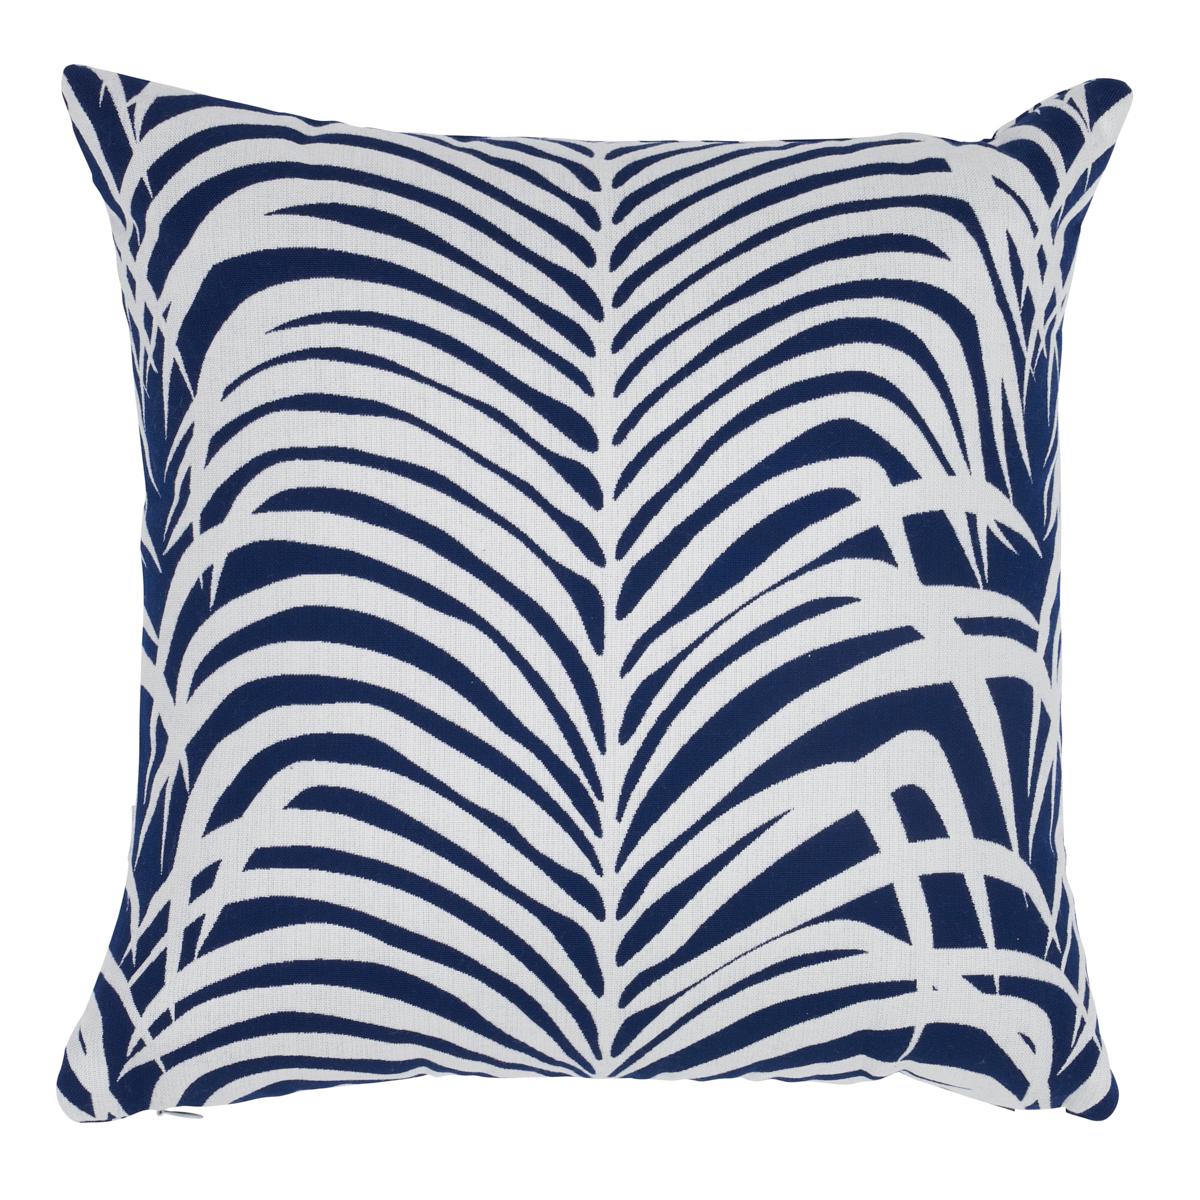 This pillow features Zebra Palm Indoor/Outdoor with a knife edge finish. Inspired by one of our most popular tropical patterns, Zebra Palm Indoor/Outdoor in navy is a chic mid-scale textural design. Pillow includes a polyfill insert and hidden